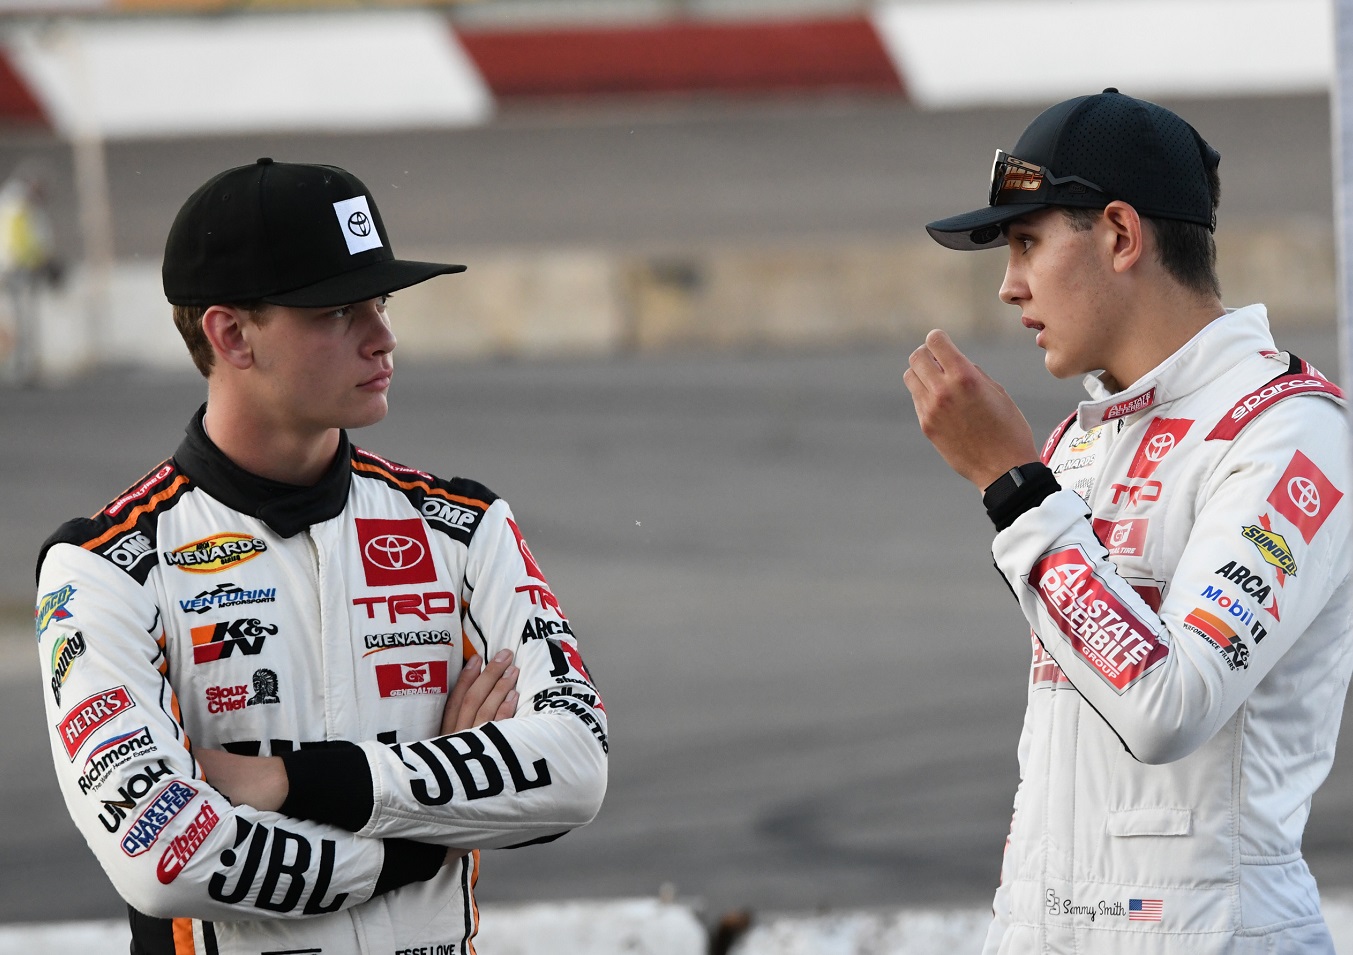 Jesse Love, left, talks with Sammy Smith during driver introductions for the ARCA Menards Series Menards 250 on June 25, 2022, at Elko Speedway in Elko New Market, Minnesota.